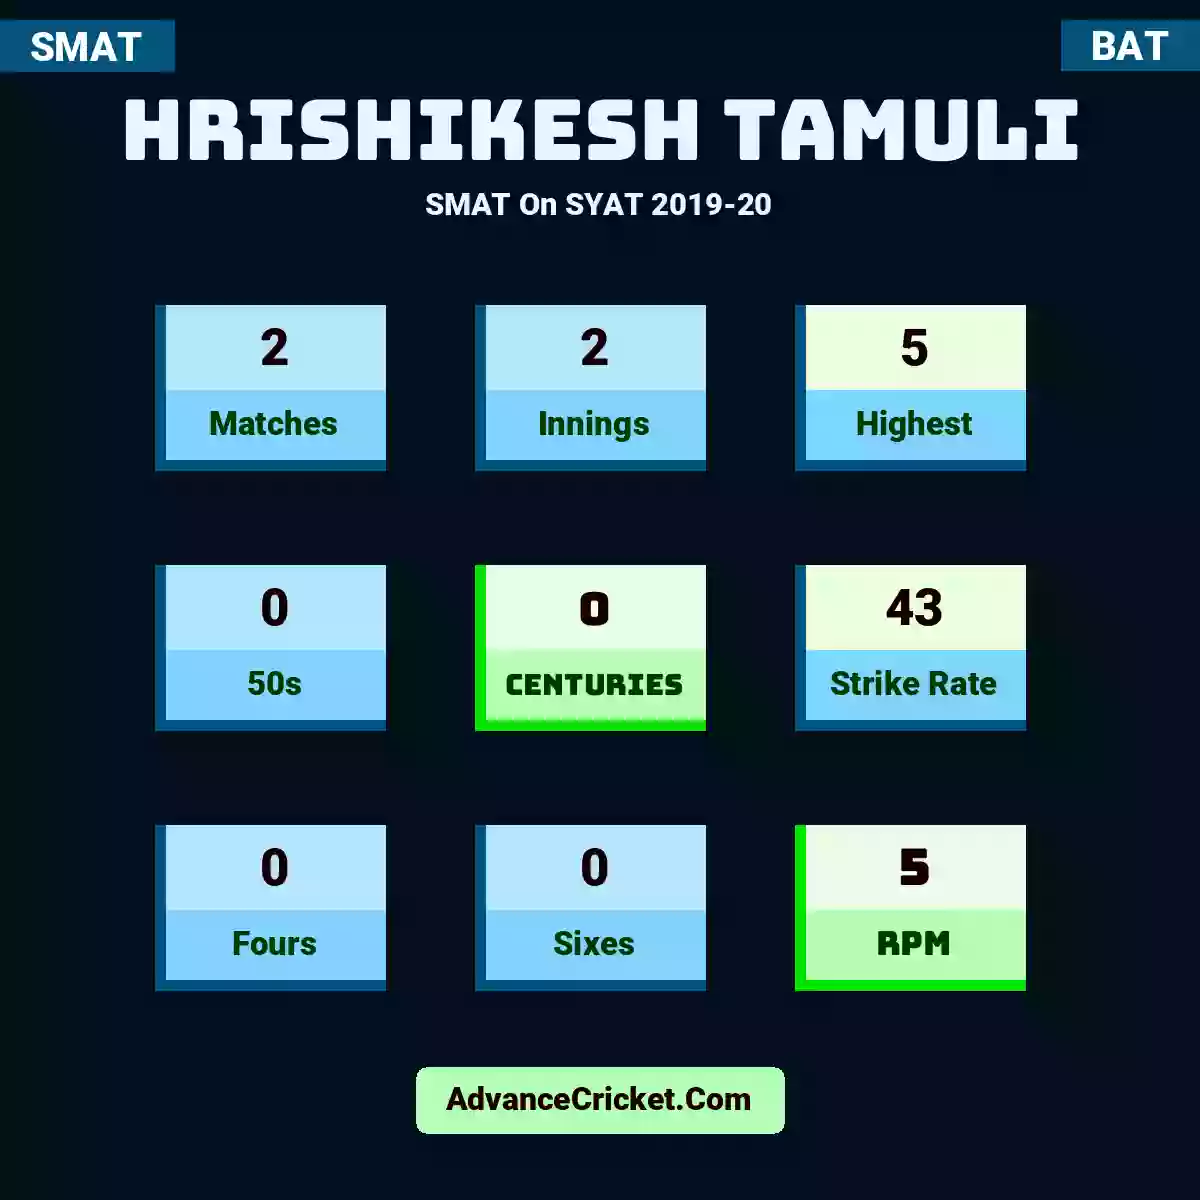 Hrishikesh Tamuli SMAT  On SYAT 2019-20, Hrishikesh Tamuli played 2 matches, scored 5 runs as highest, 0 half-centuries, and 0 centuries, with a strike rate of 43. H.Tamuli hit 0 fours and 0 sixes, with an RPM of 5.